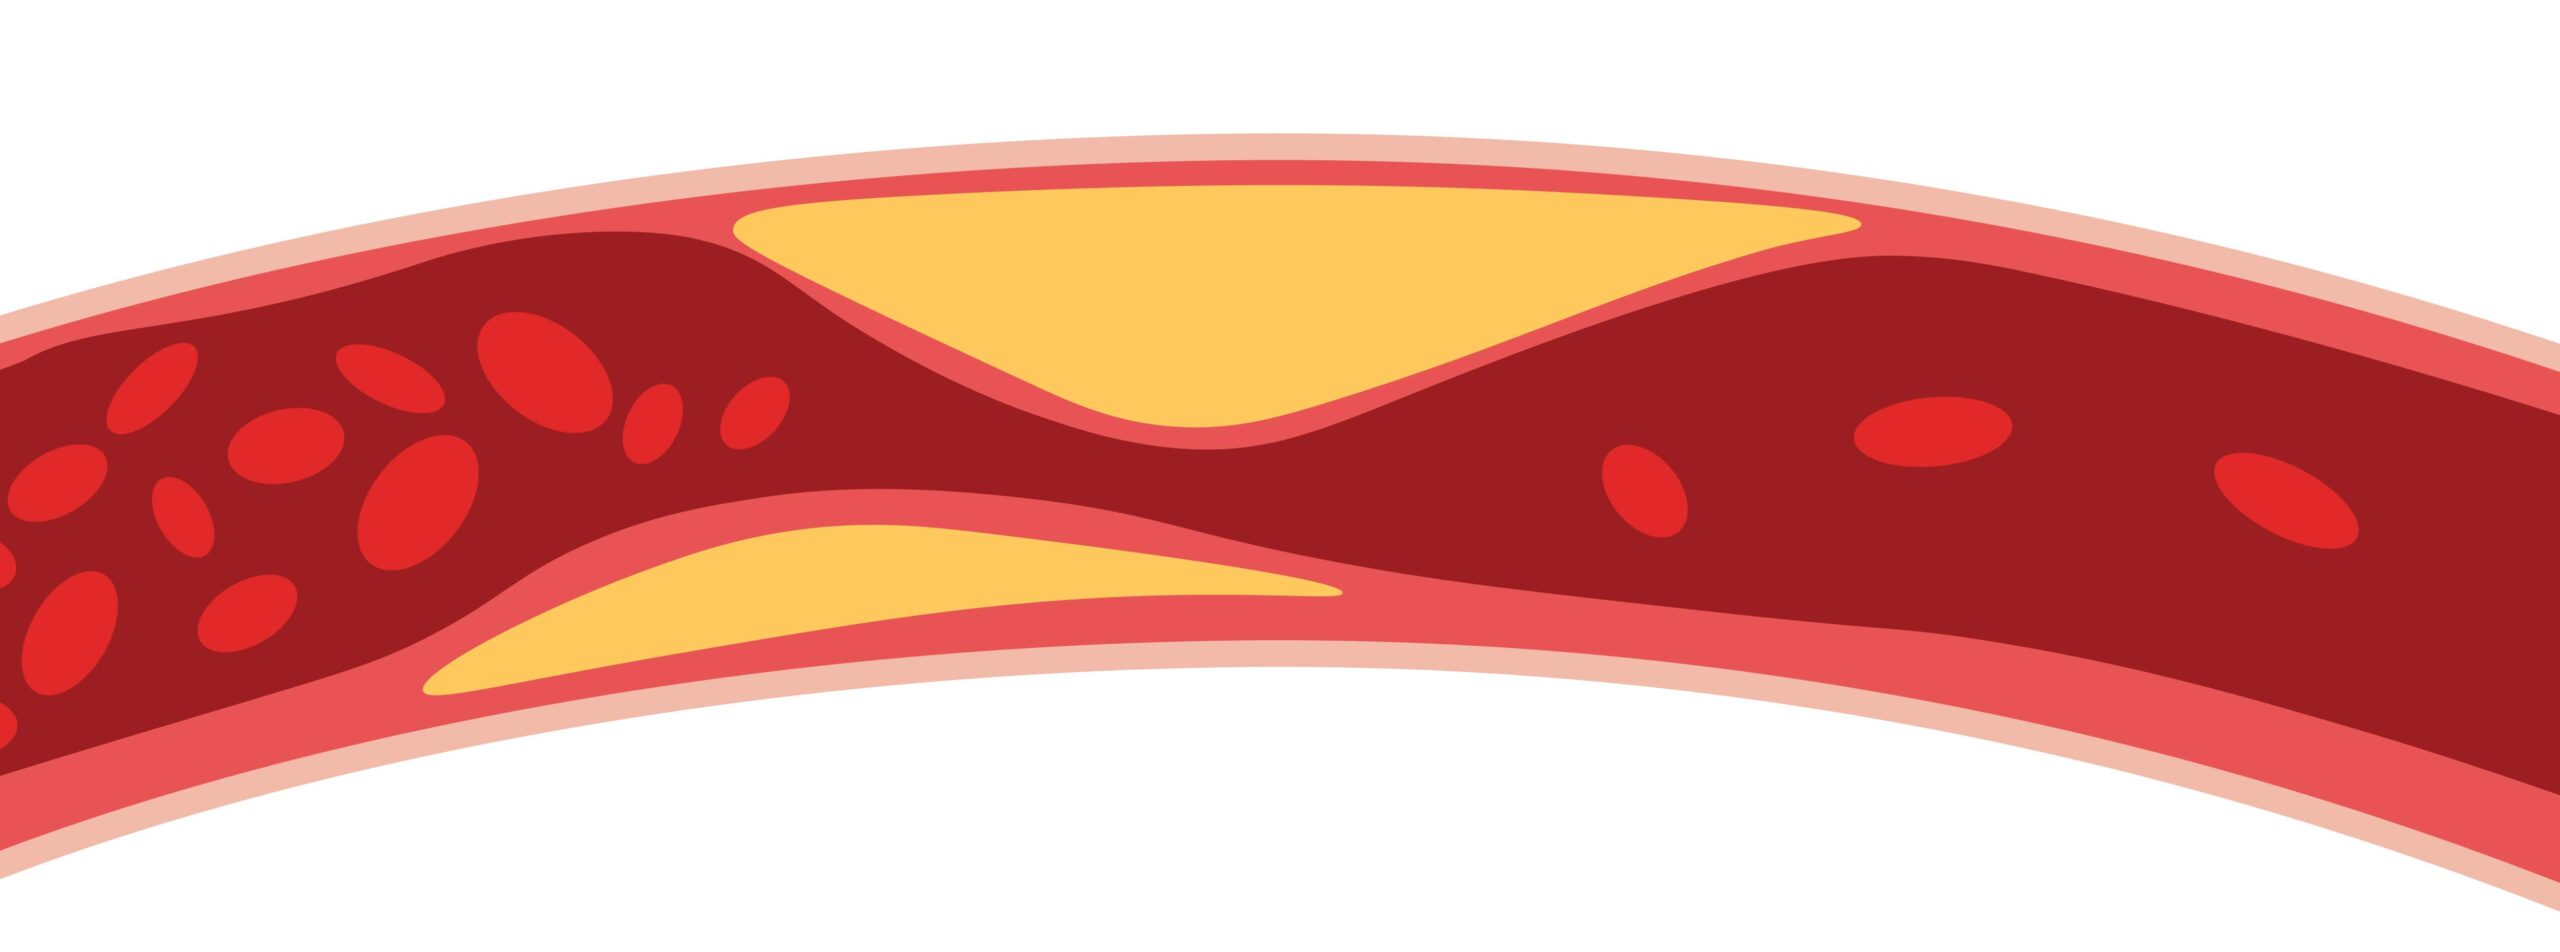 Artist rendering of a blood vein with high levels of cholesterol